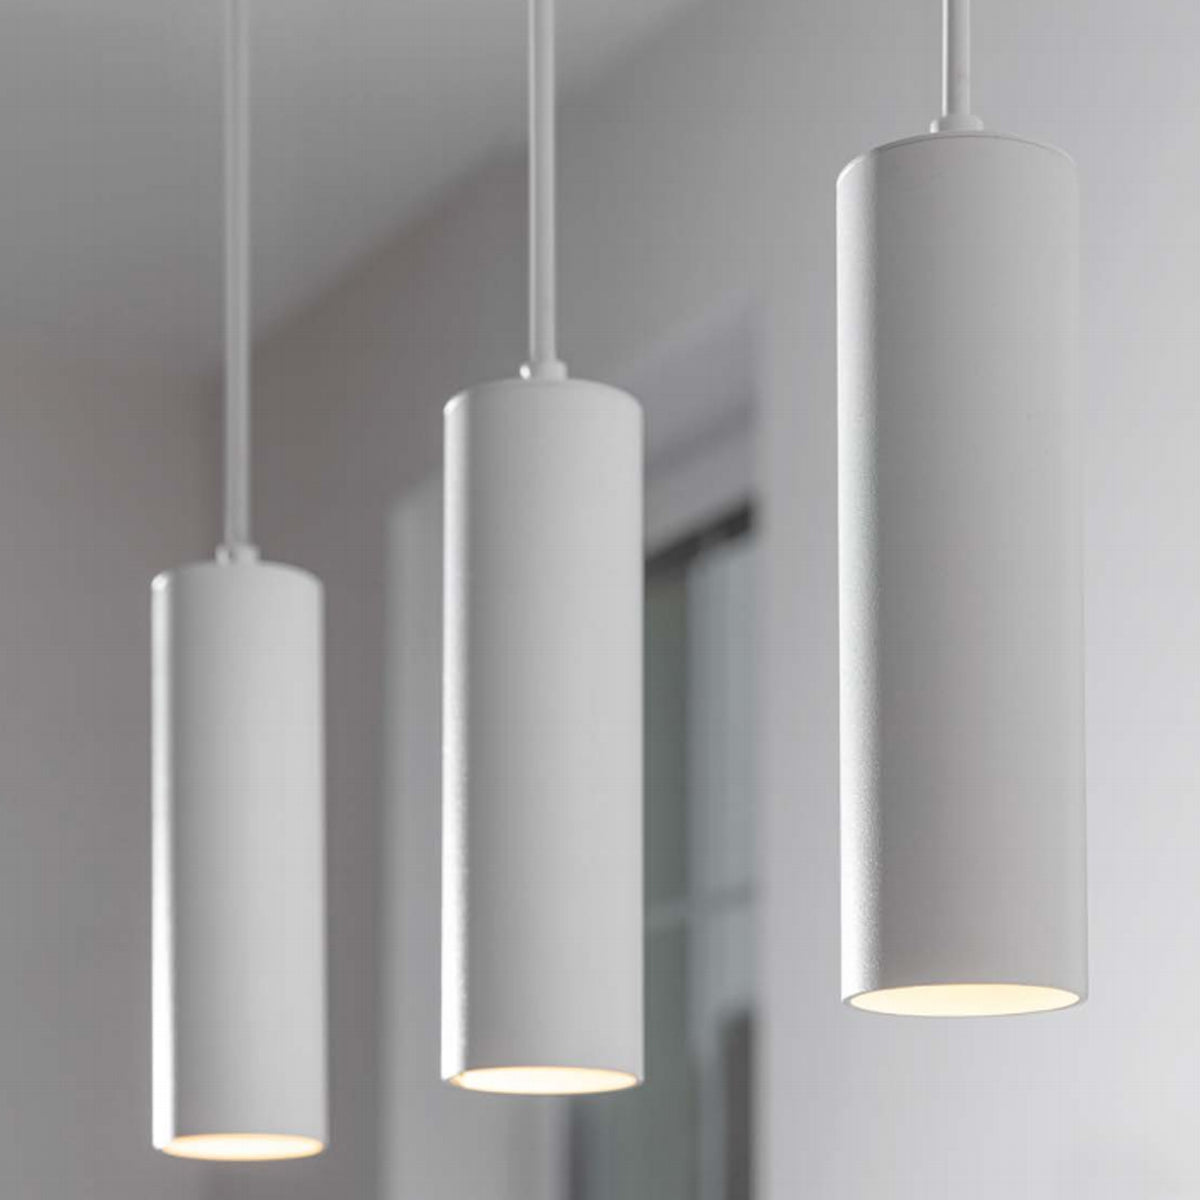 High-quality white ceiling triple hanging spotlight pendant. A cylinder pendant with a modern and sleek design would add a huge element of style and class to any room. Made of aluminium with a powder coat finish. Height can be adjusted during installation.